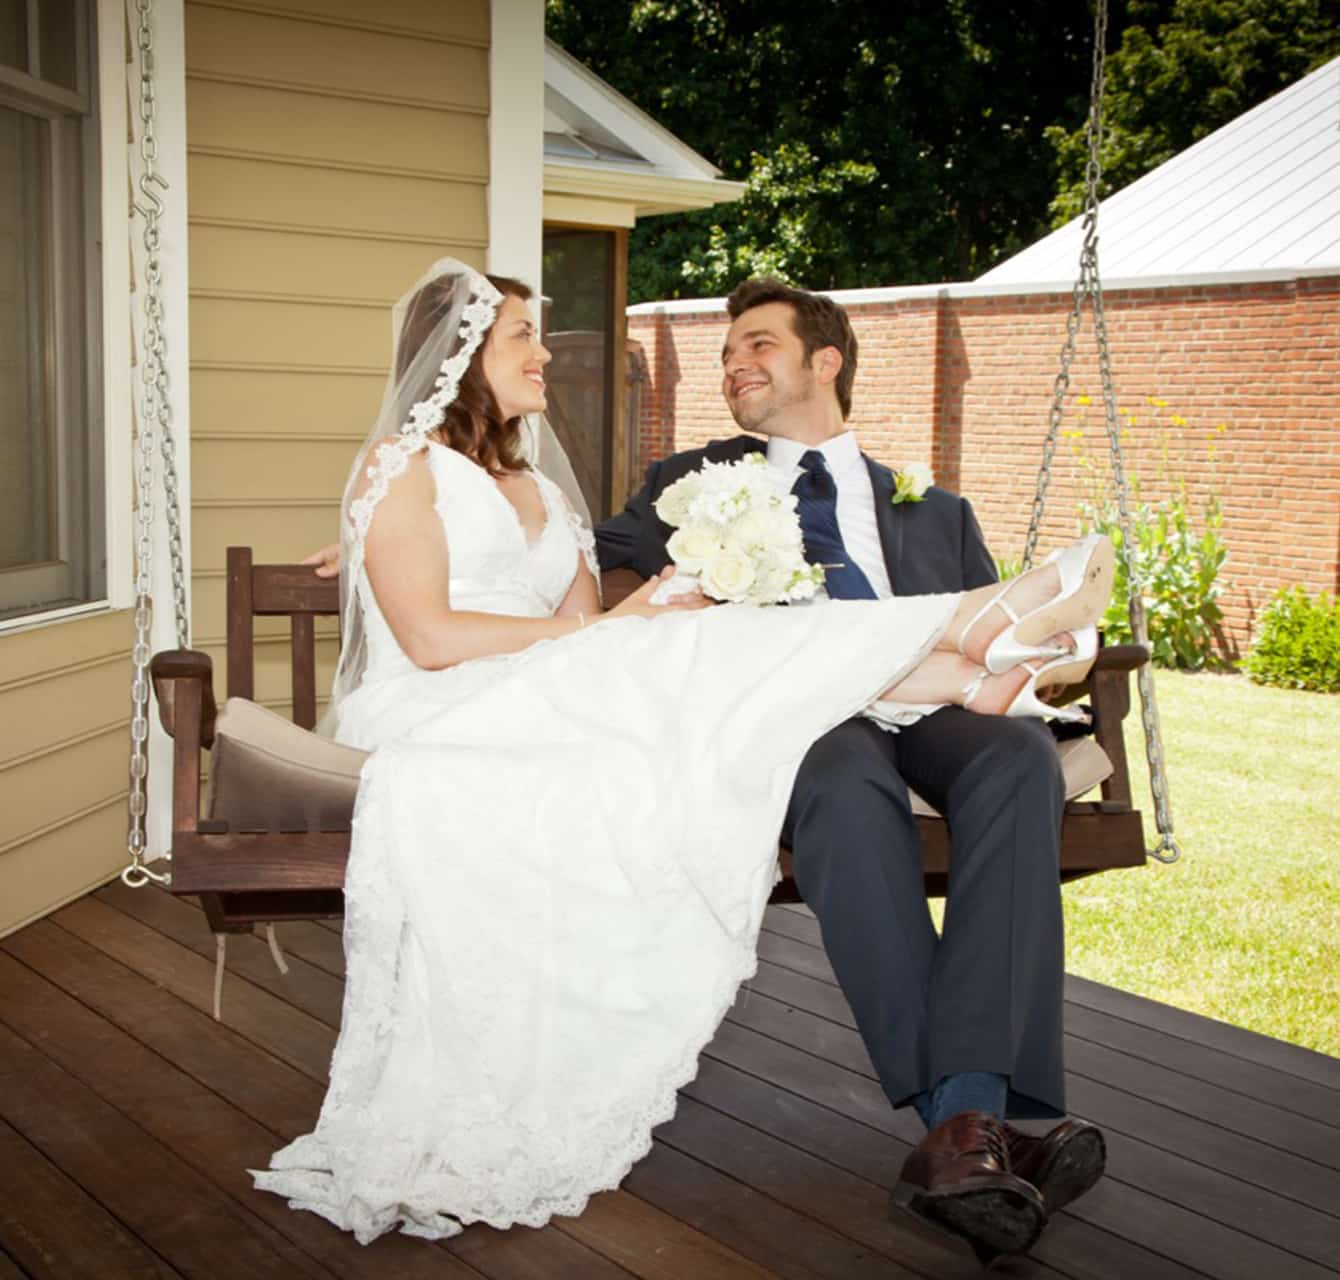 Married couple on a porch swing